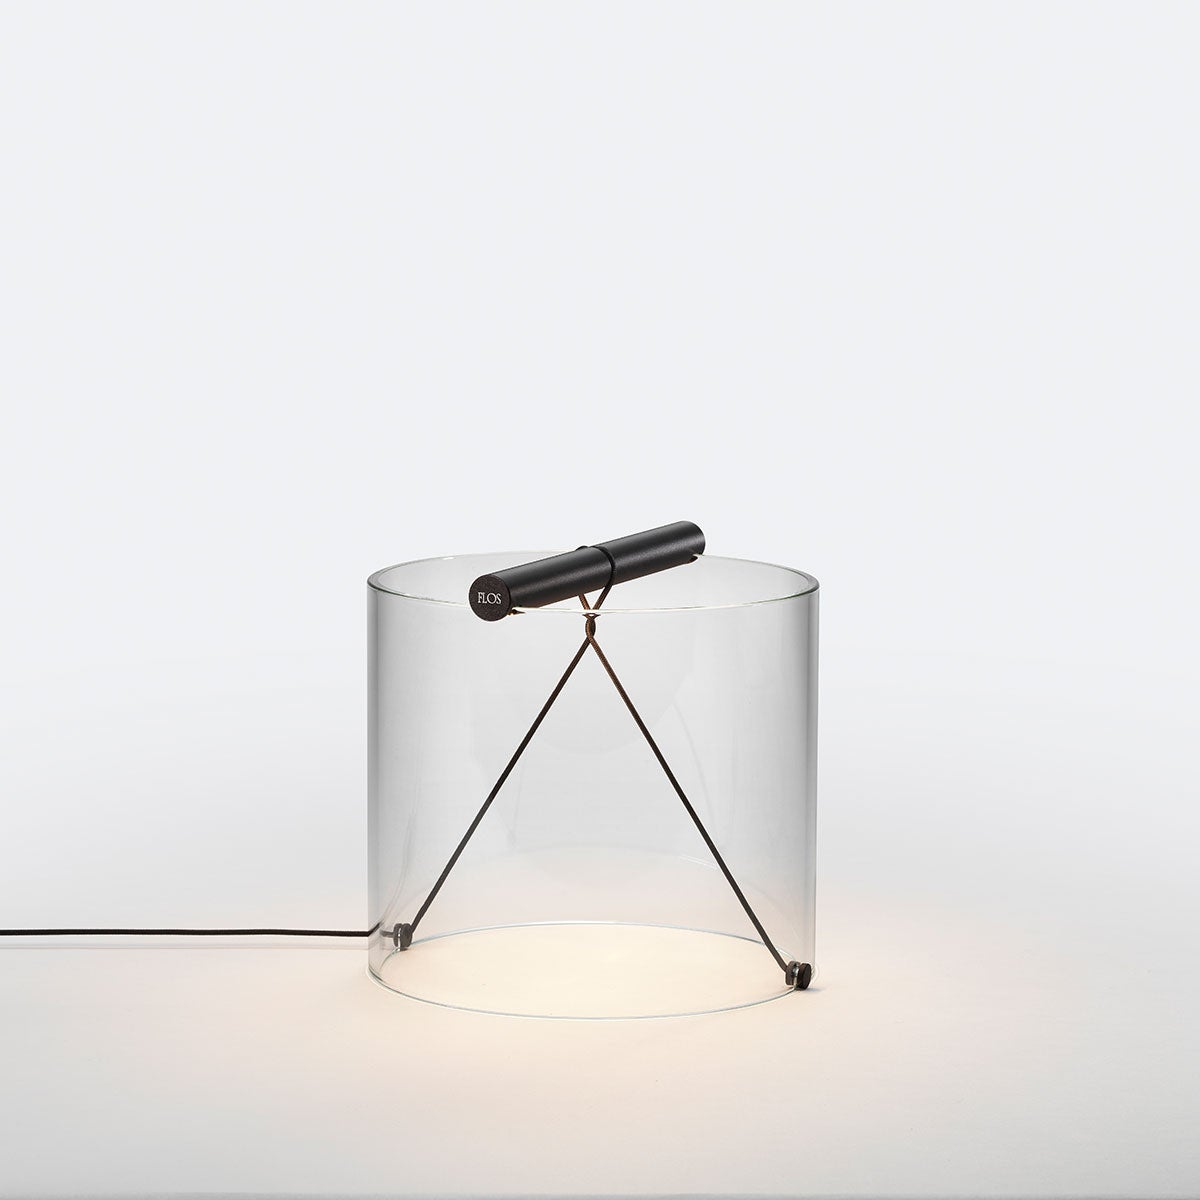 Flos To-Tie T1 Table Lamp in Anodized Black by Guglielmo Poletti For Sale